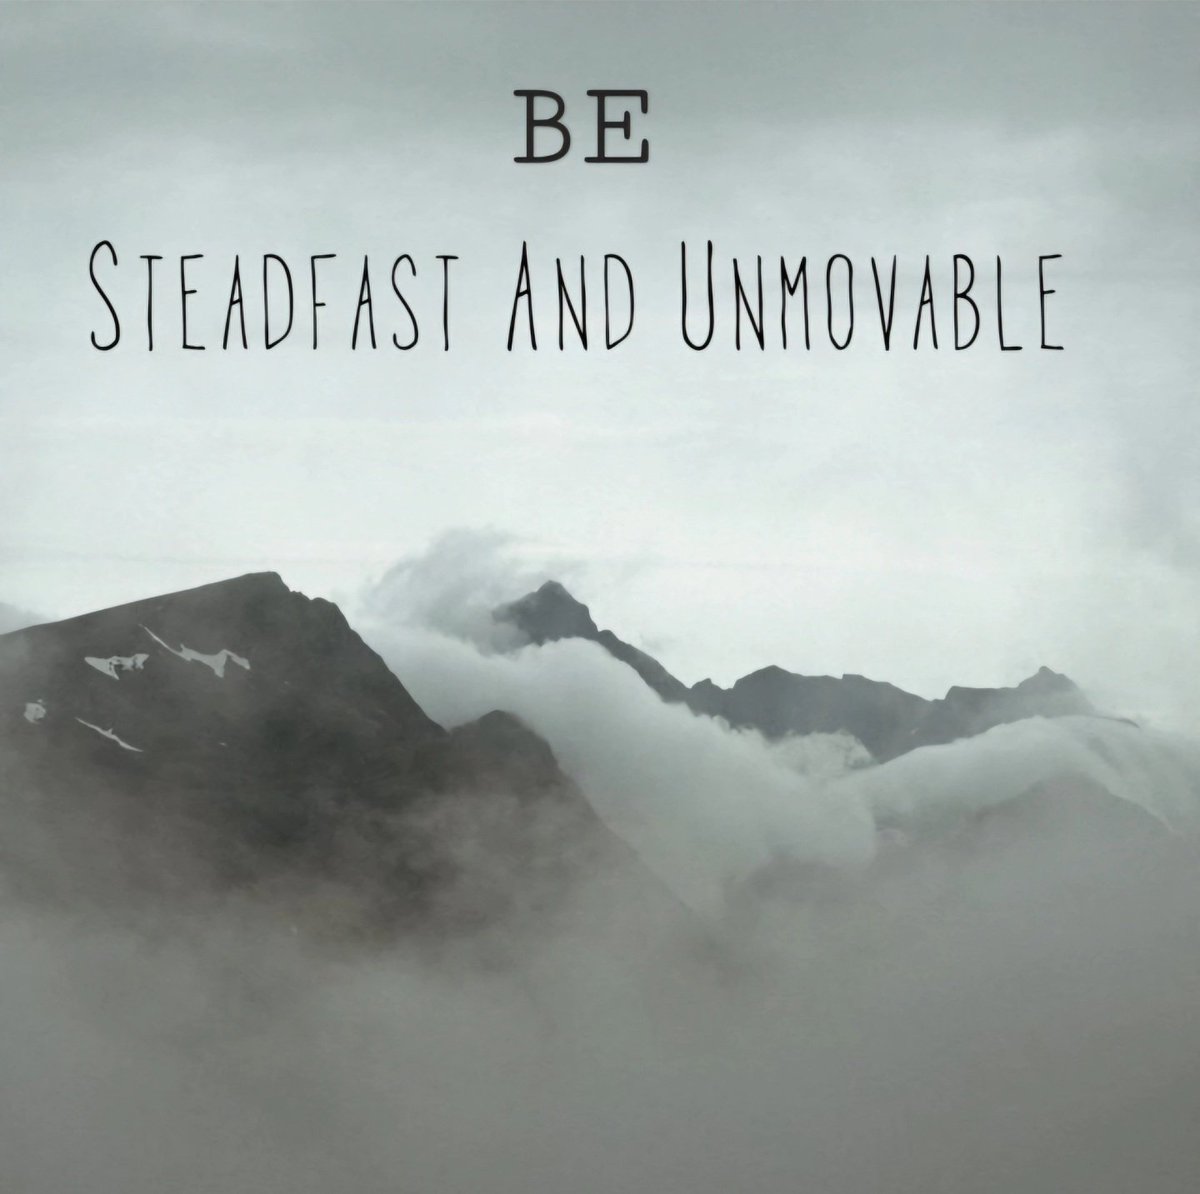 Good morning! Bend with the wind, but don't break, and you will win.  Be steadfast and unmoveable. #bend #dontbreak #besteadfast #unmoveable #winningseason #helpinthehouse #Solutionist #iamaningredient #JusticeGeneral